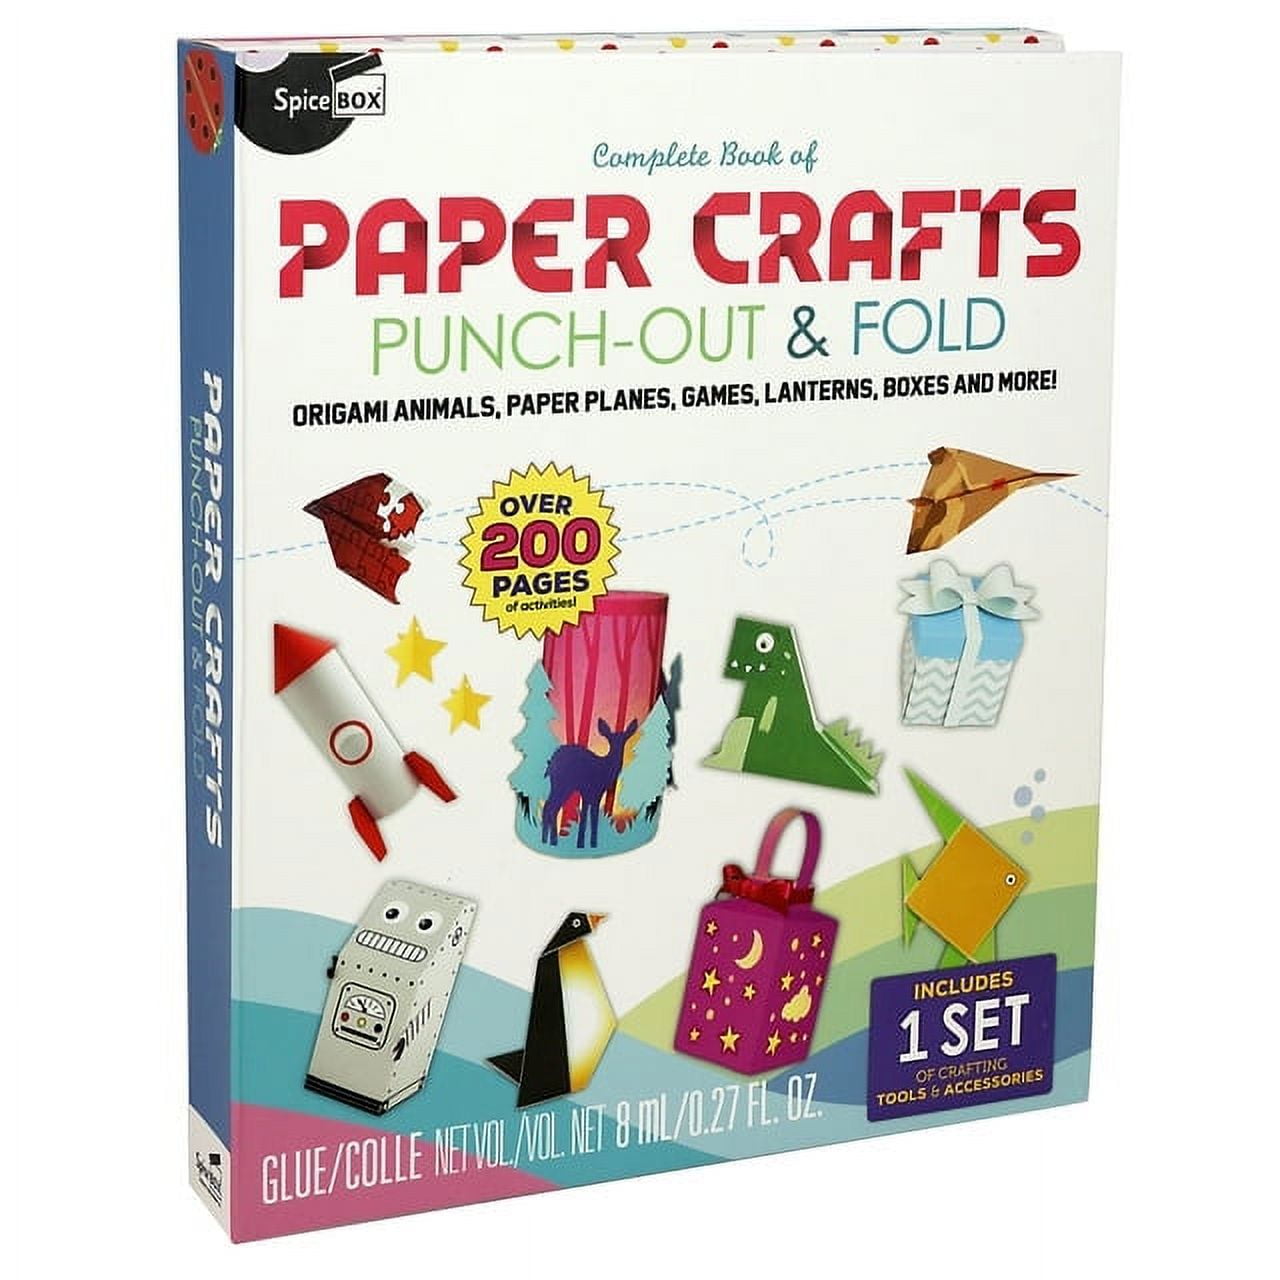  SpiceBox Watercolor Book and Painting Set, Learn How to Paint,  Arts and Crafts Hobby Kits for Adults : Arts, Crafts & Sewing